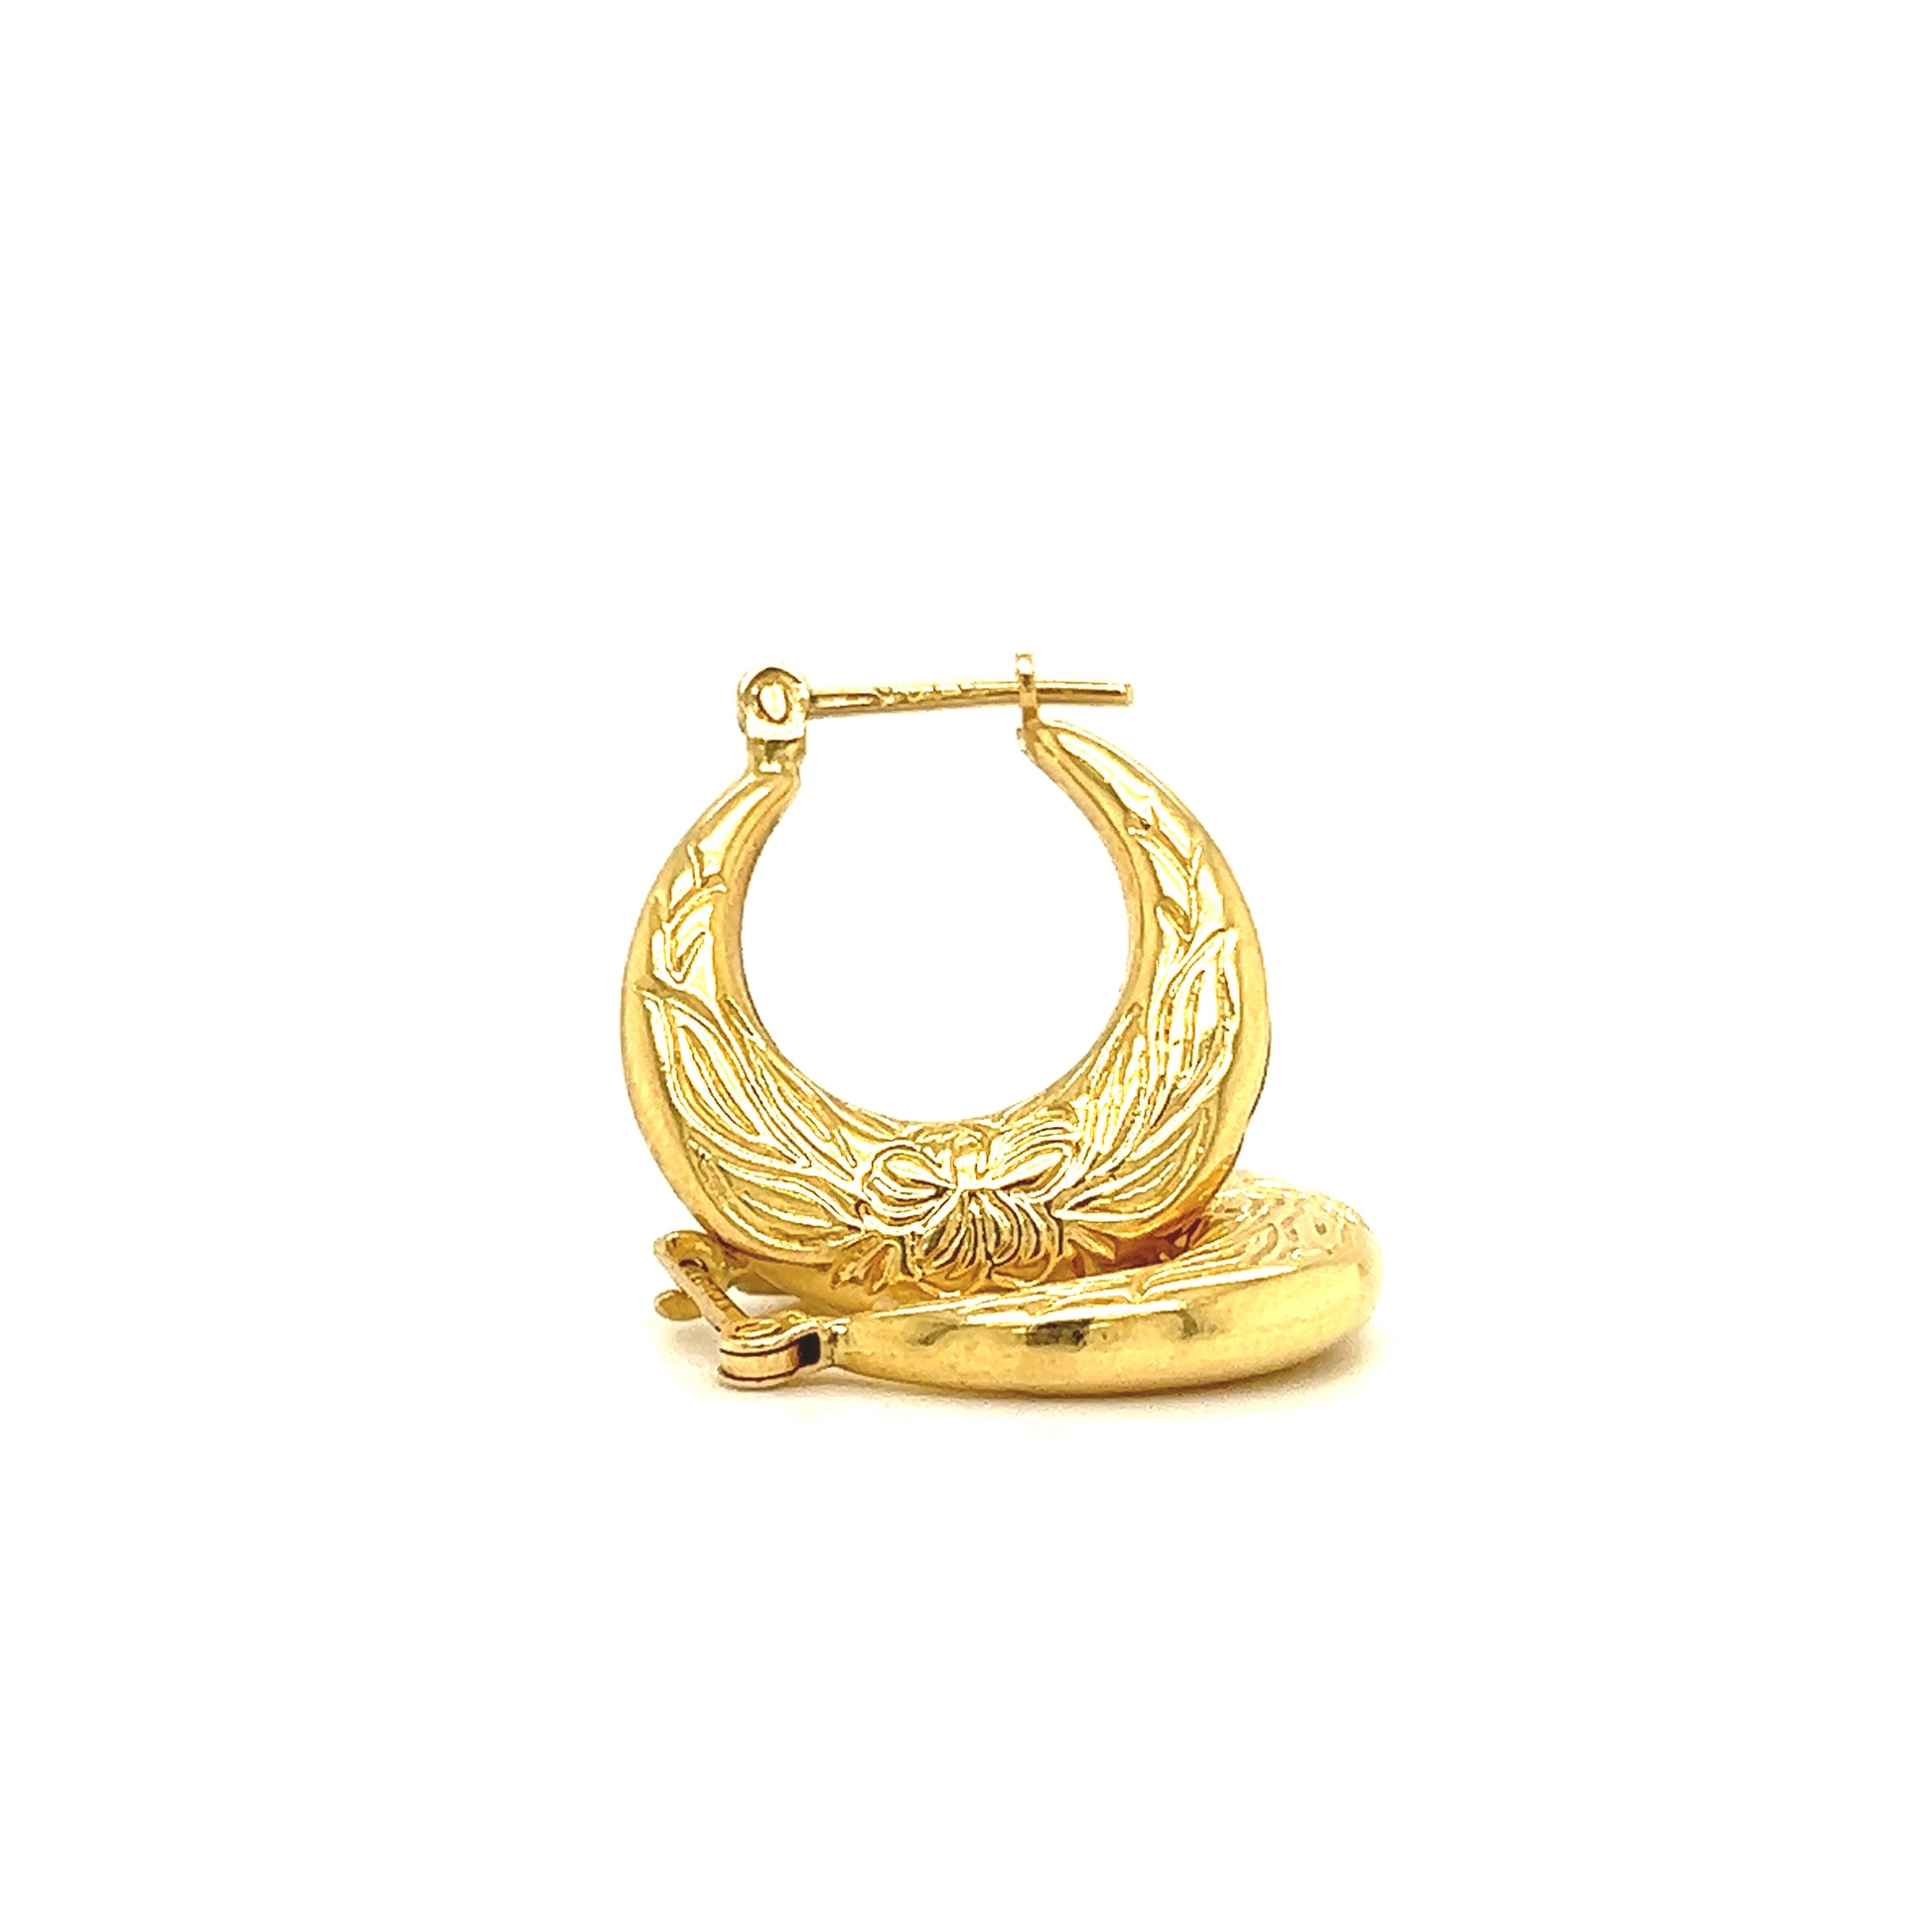 Hoop 18mm Earrings with Flower Engraving in 14K Yellow Gold Front and Side View